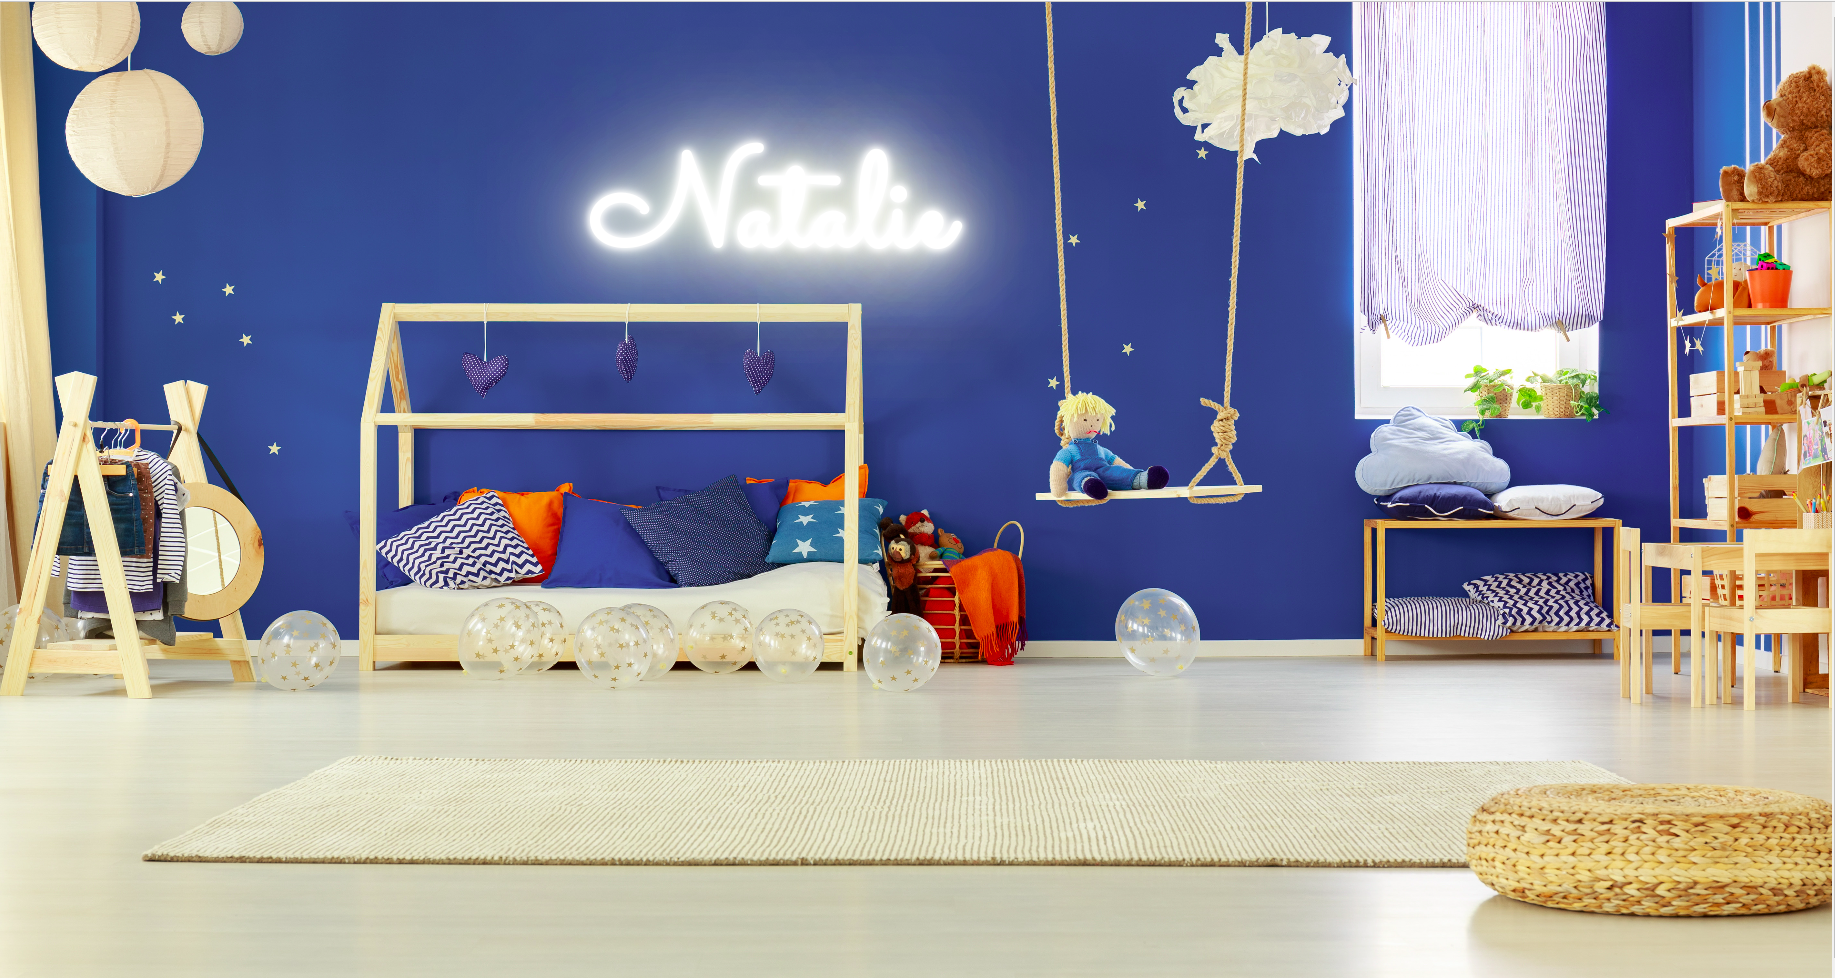 "Natalie" Baby Name LED Neon Sign